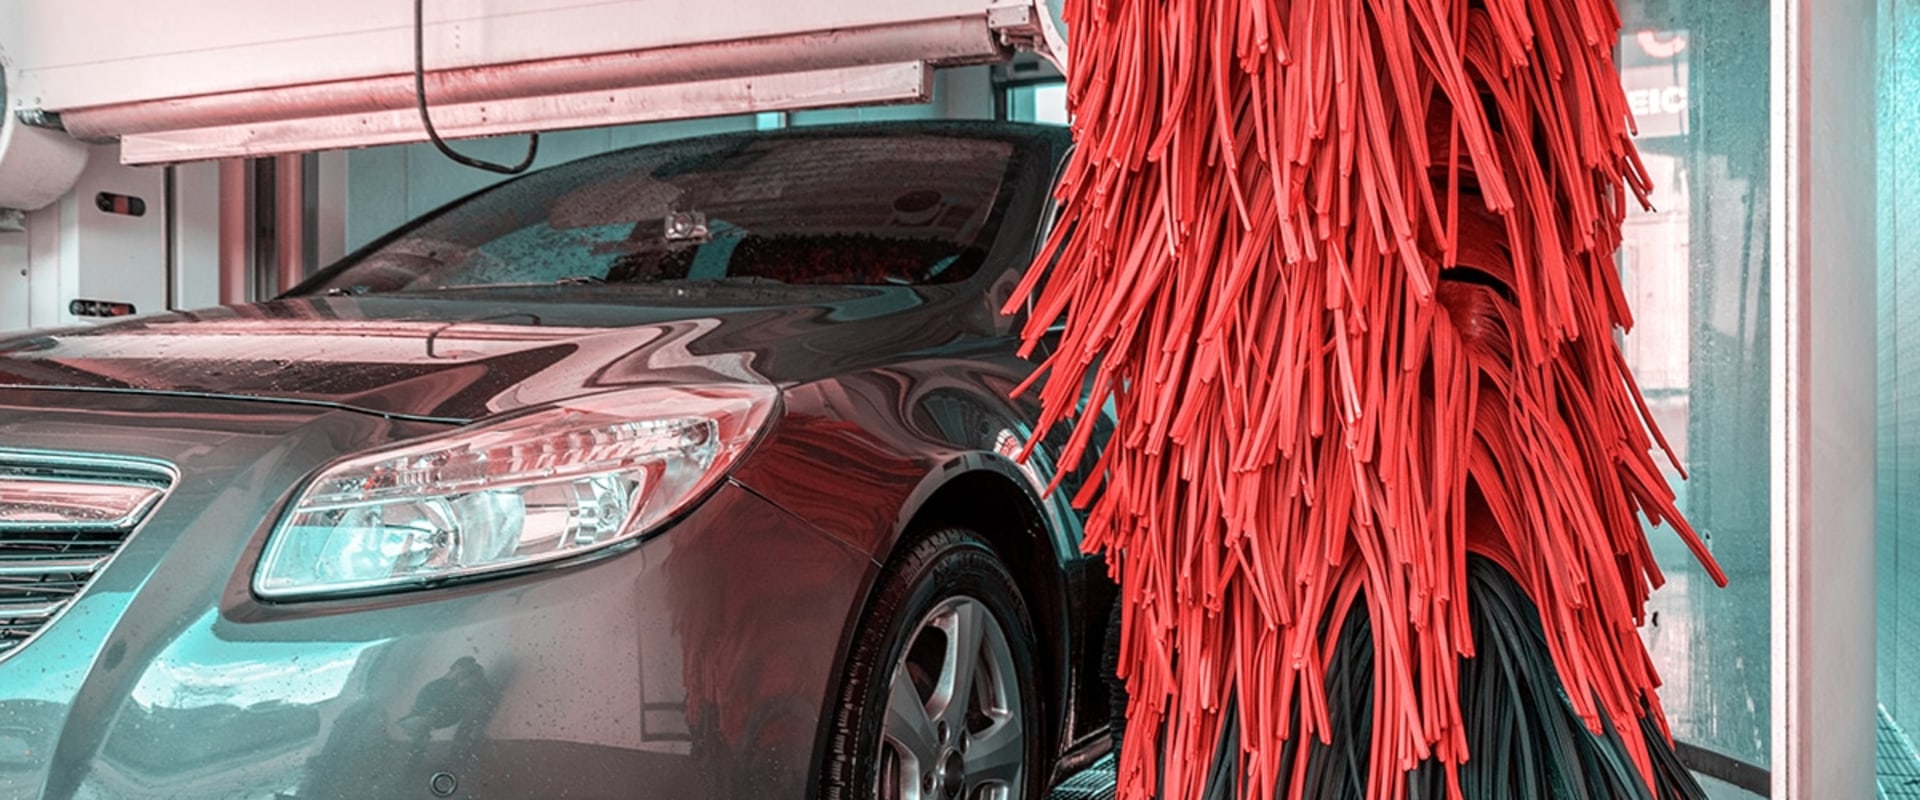 Is mobile car wash legal?